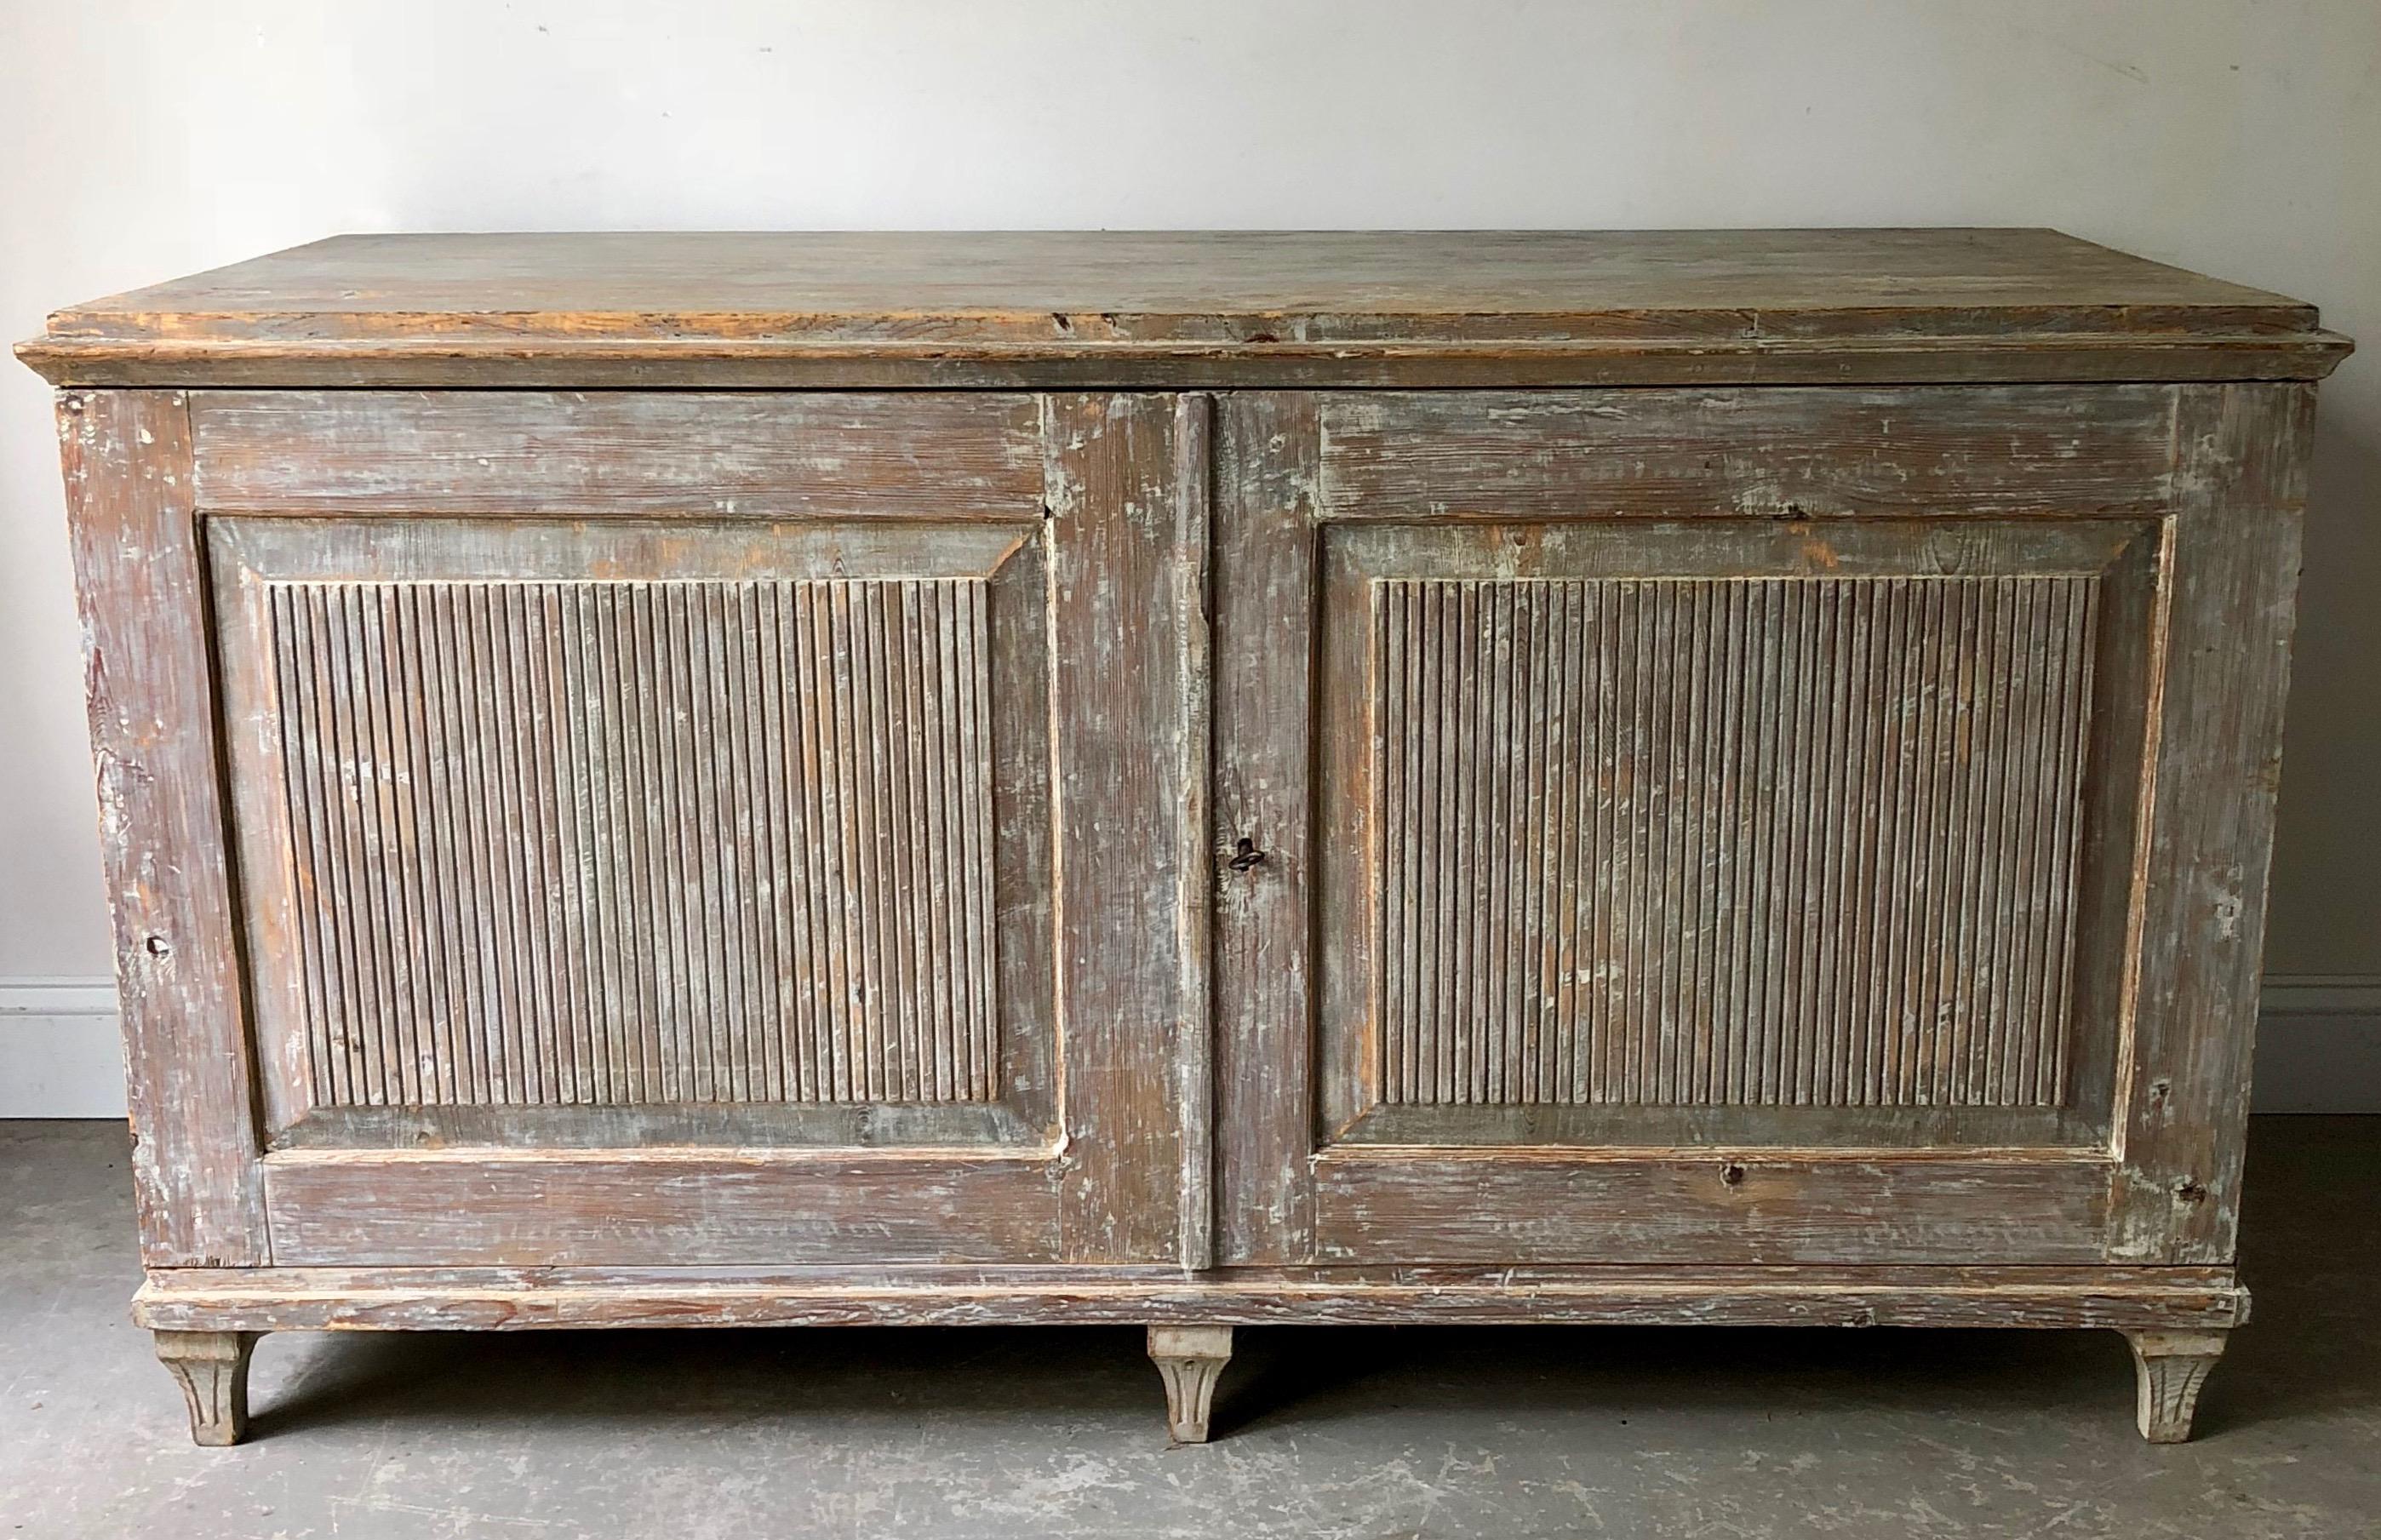 An elegant, very large early 19th century Gustavian period sideboard with beautify carved reeded and panelled door fronts on fluted tapered feet,
Stockholm, Sweden, circa 1800.
Surprising pieces and objects, authentic, decorative and rare items.